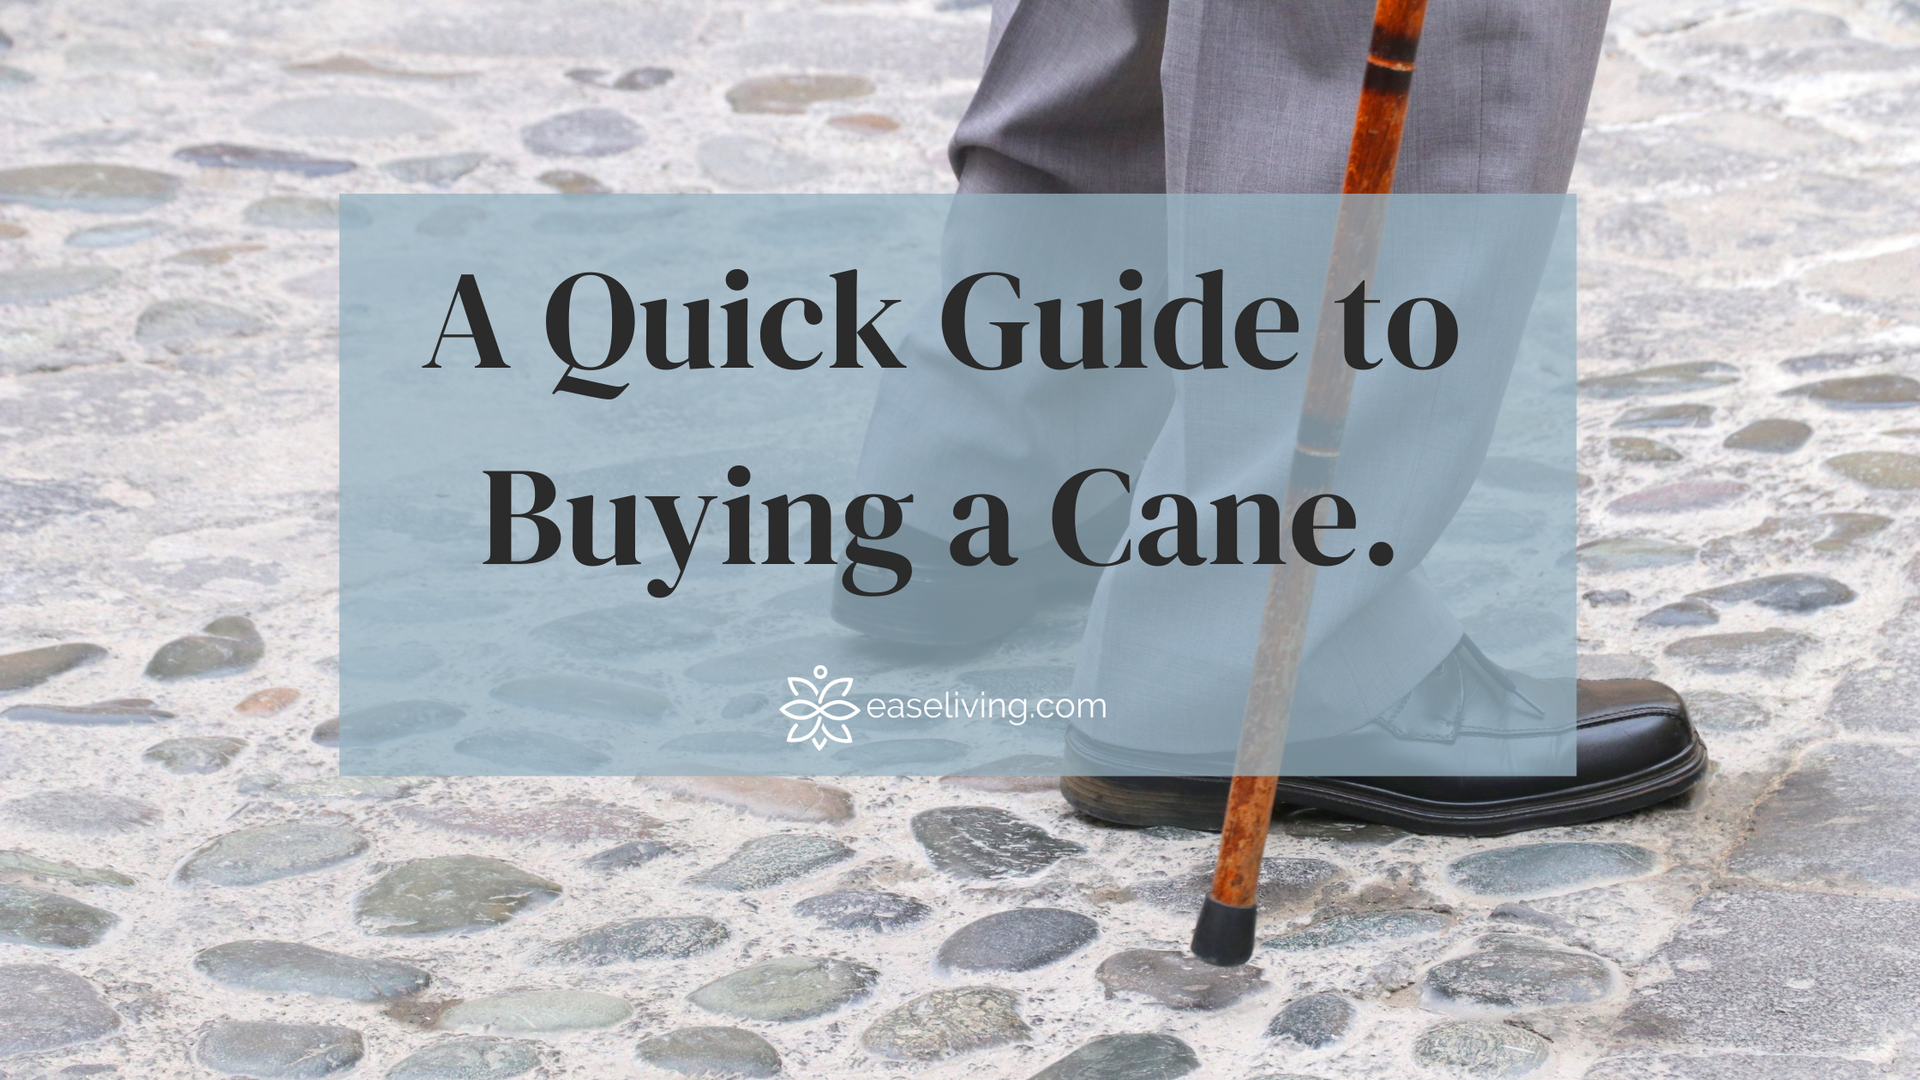 Quick Guide to Buying a Cane